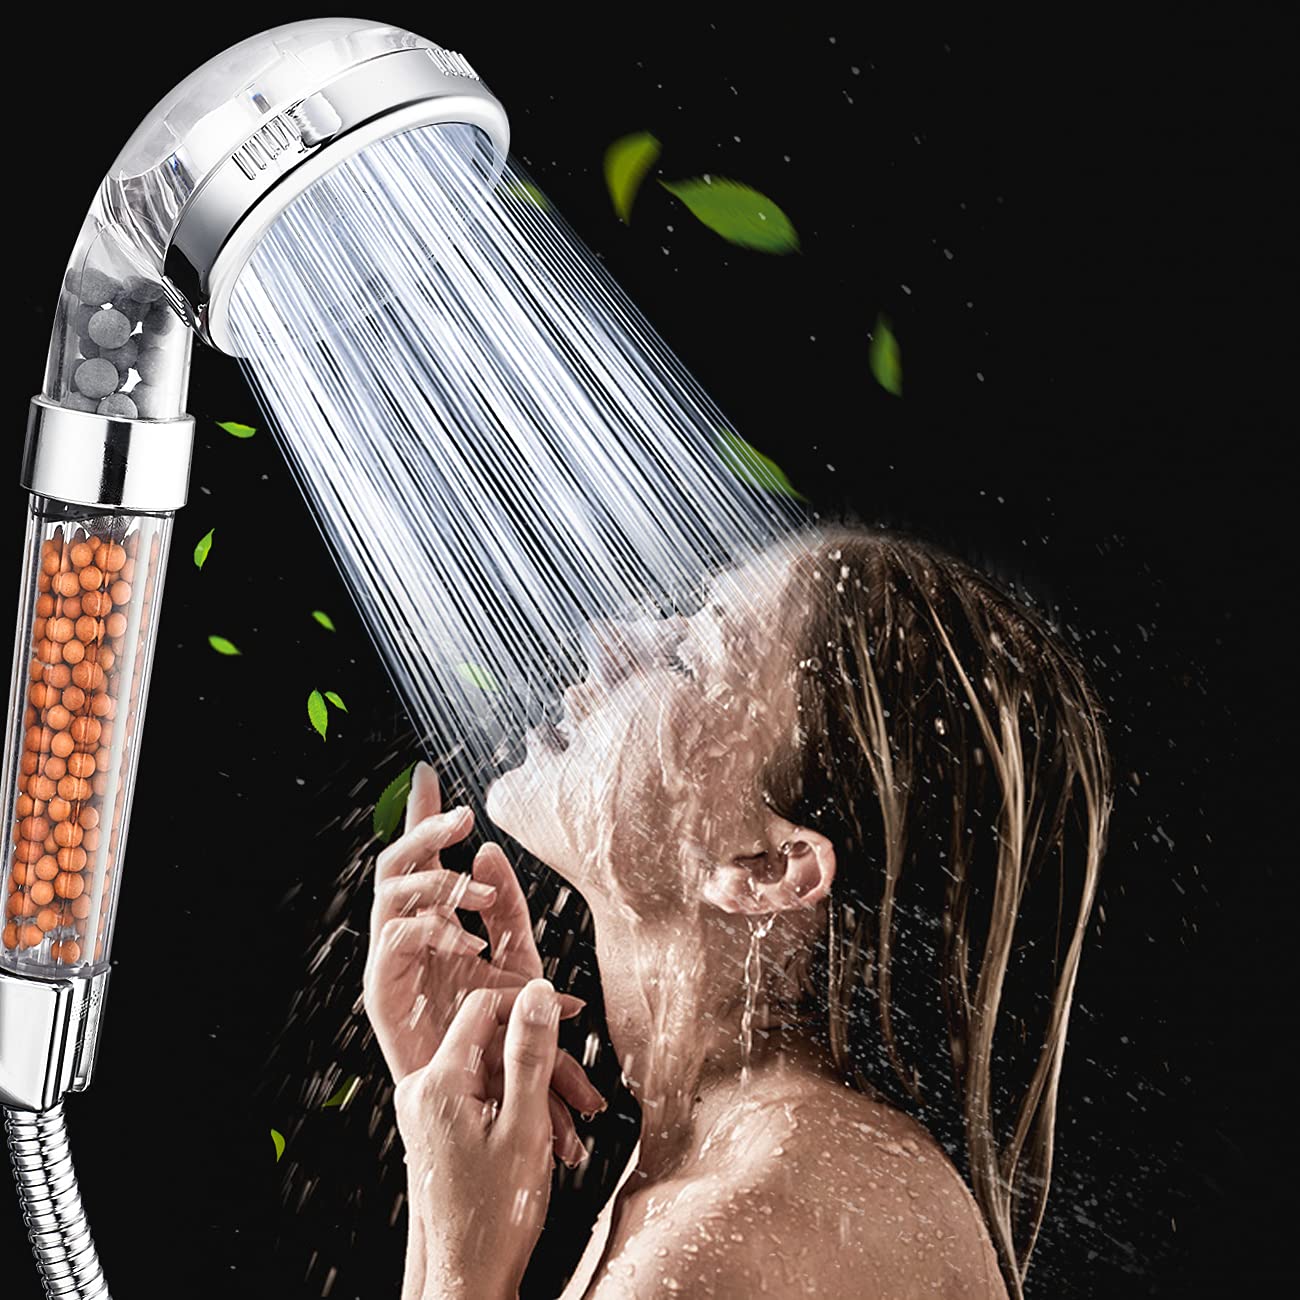 NOSAME Shower Head, Filter Filtration High Pressure Water Saving 3 Mode Function Spray Handheld Showerheads for Dry Skin & Hair